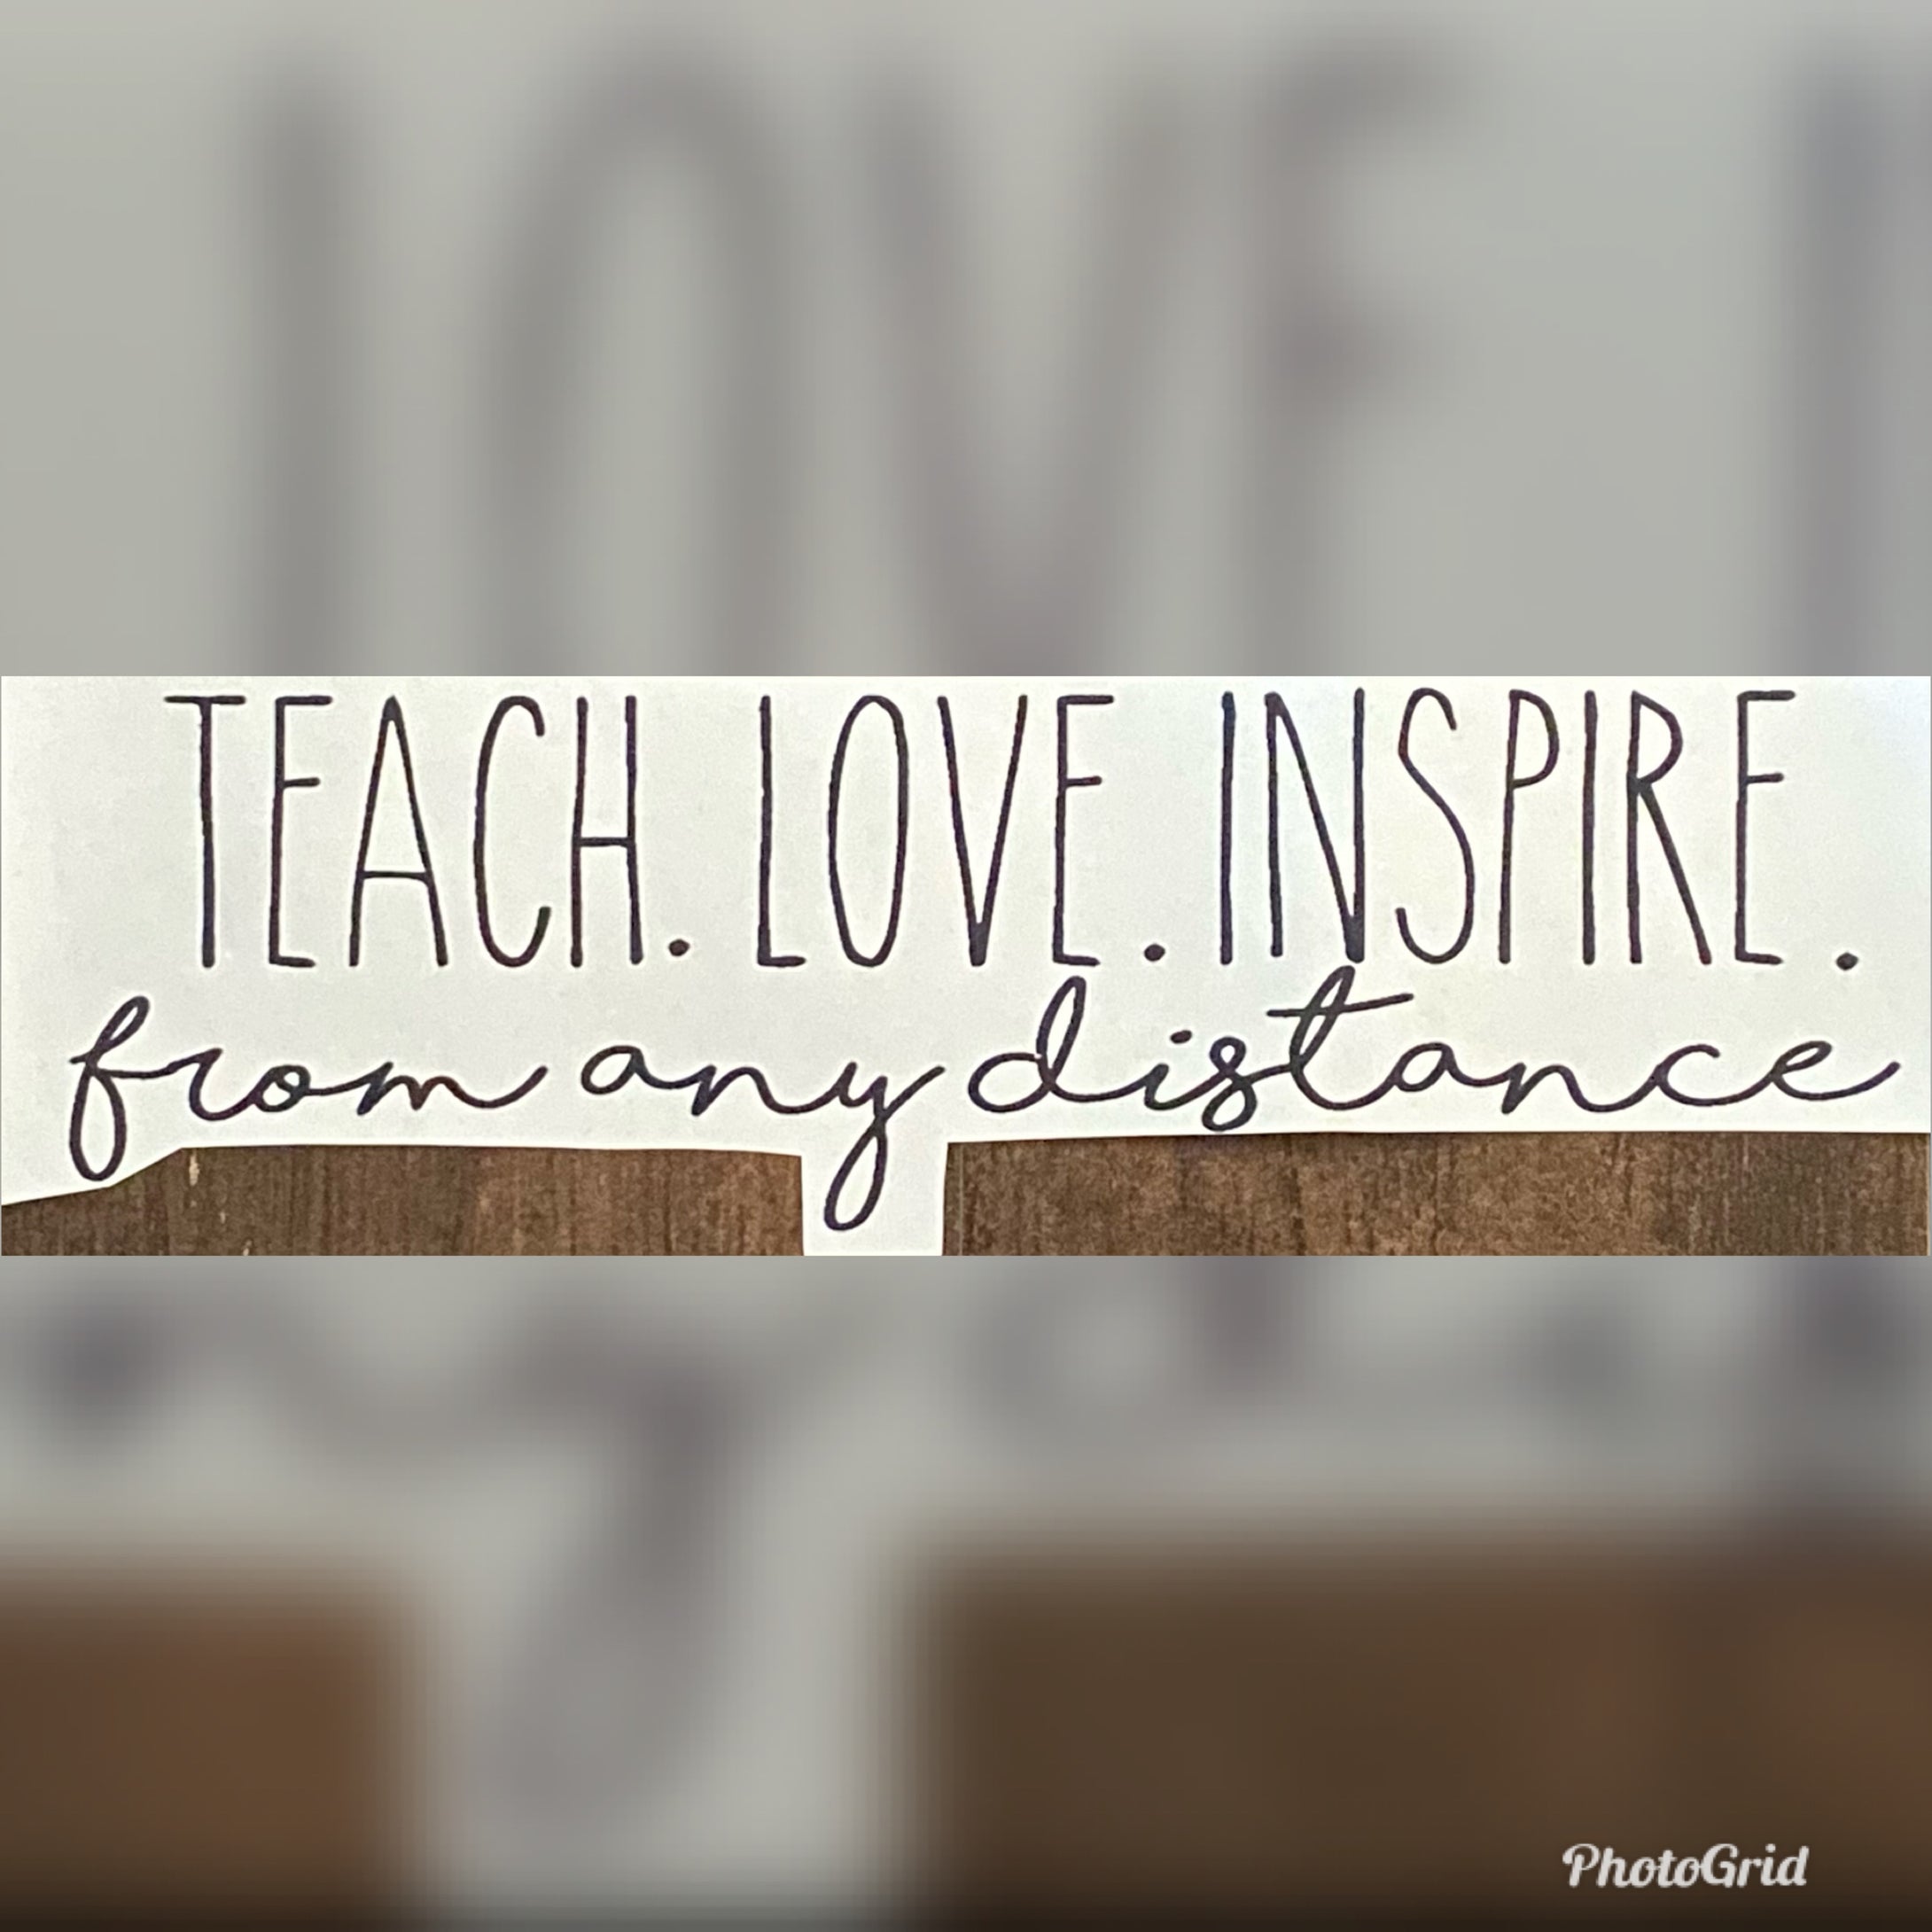 Teach Love Inspire from any distance